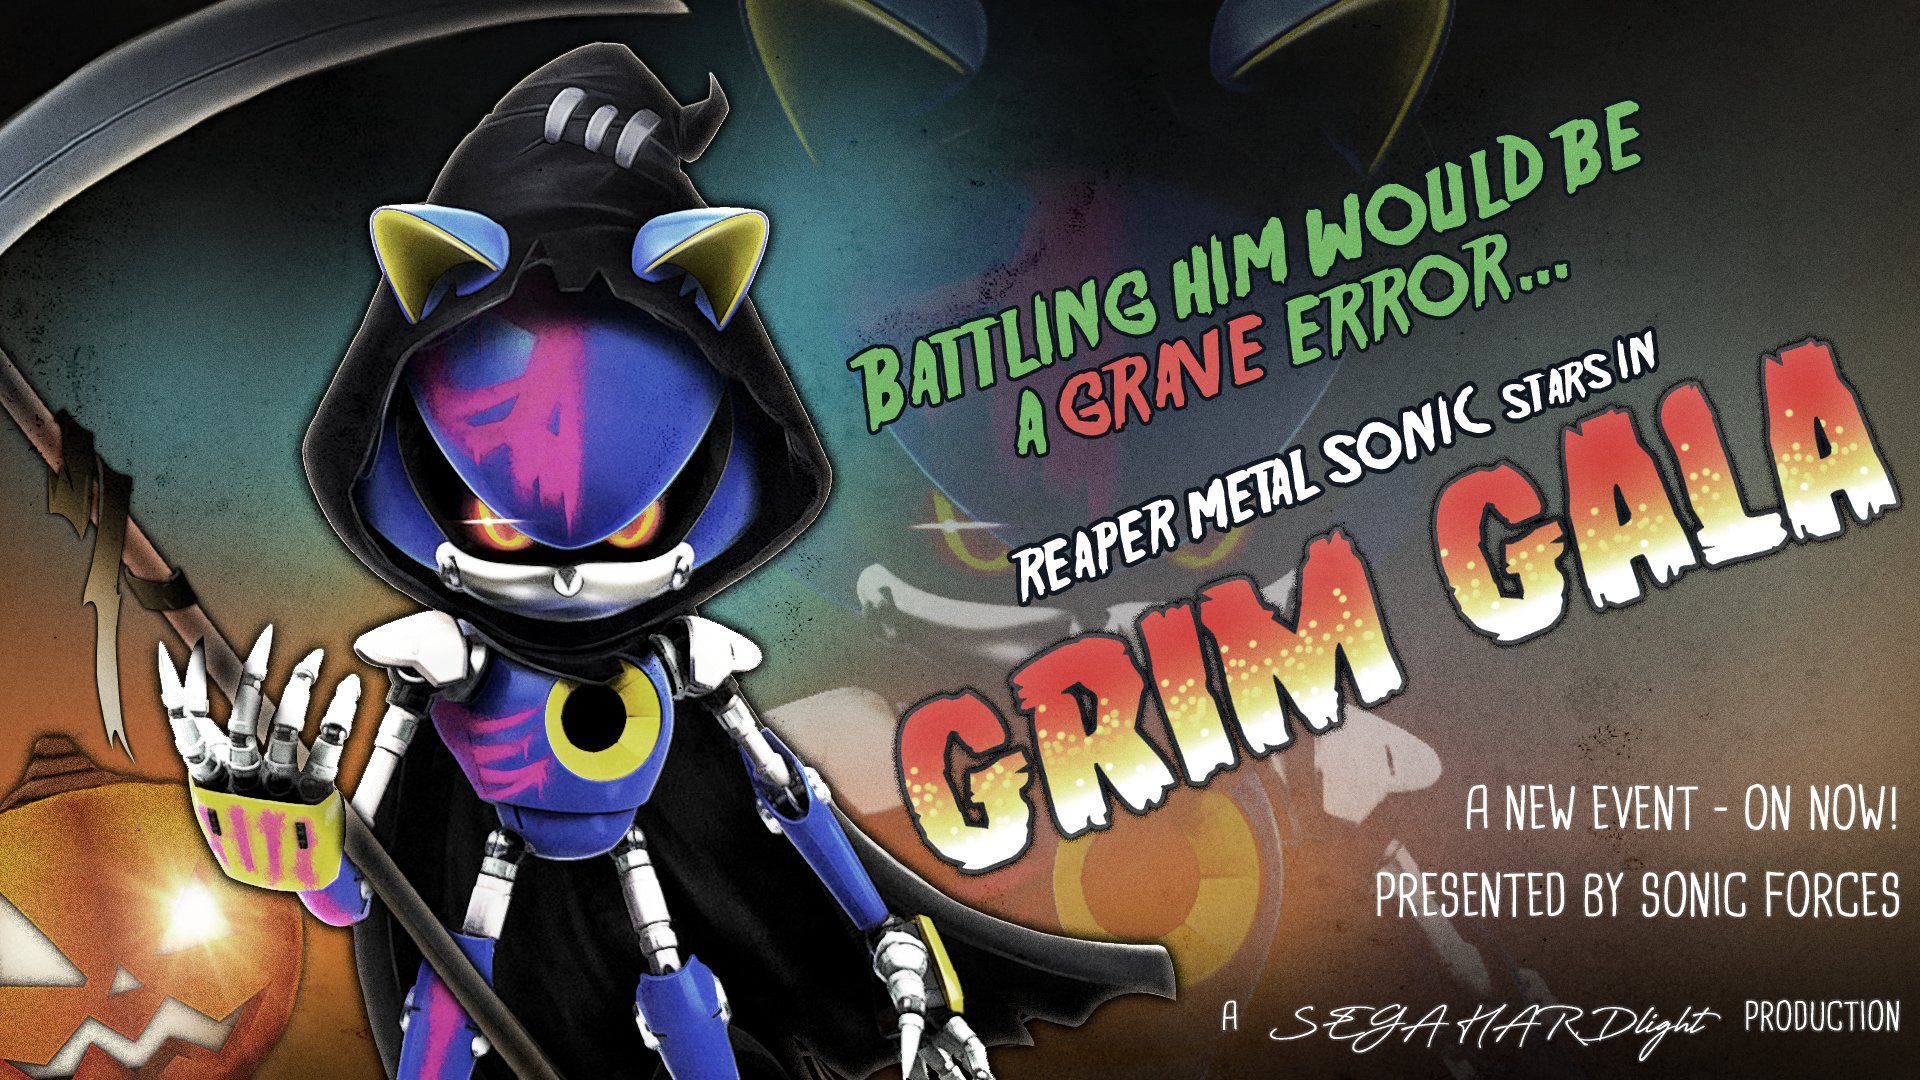 Sonic Forces 'Grim Gala' Begins, Reaper Metal Sonic Up For Grabs